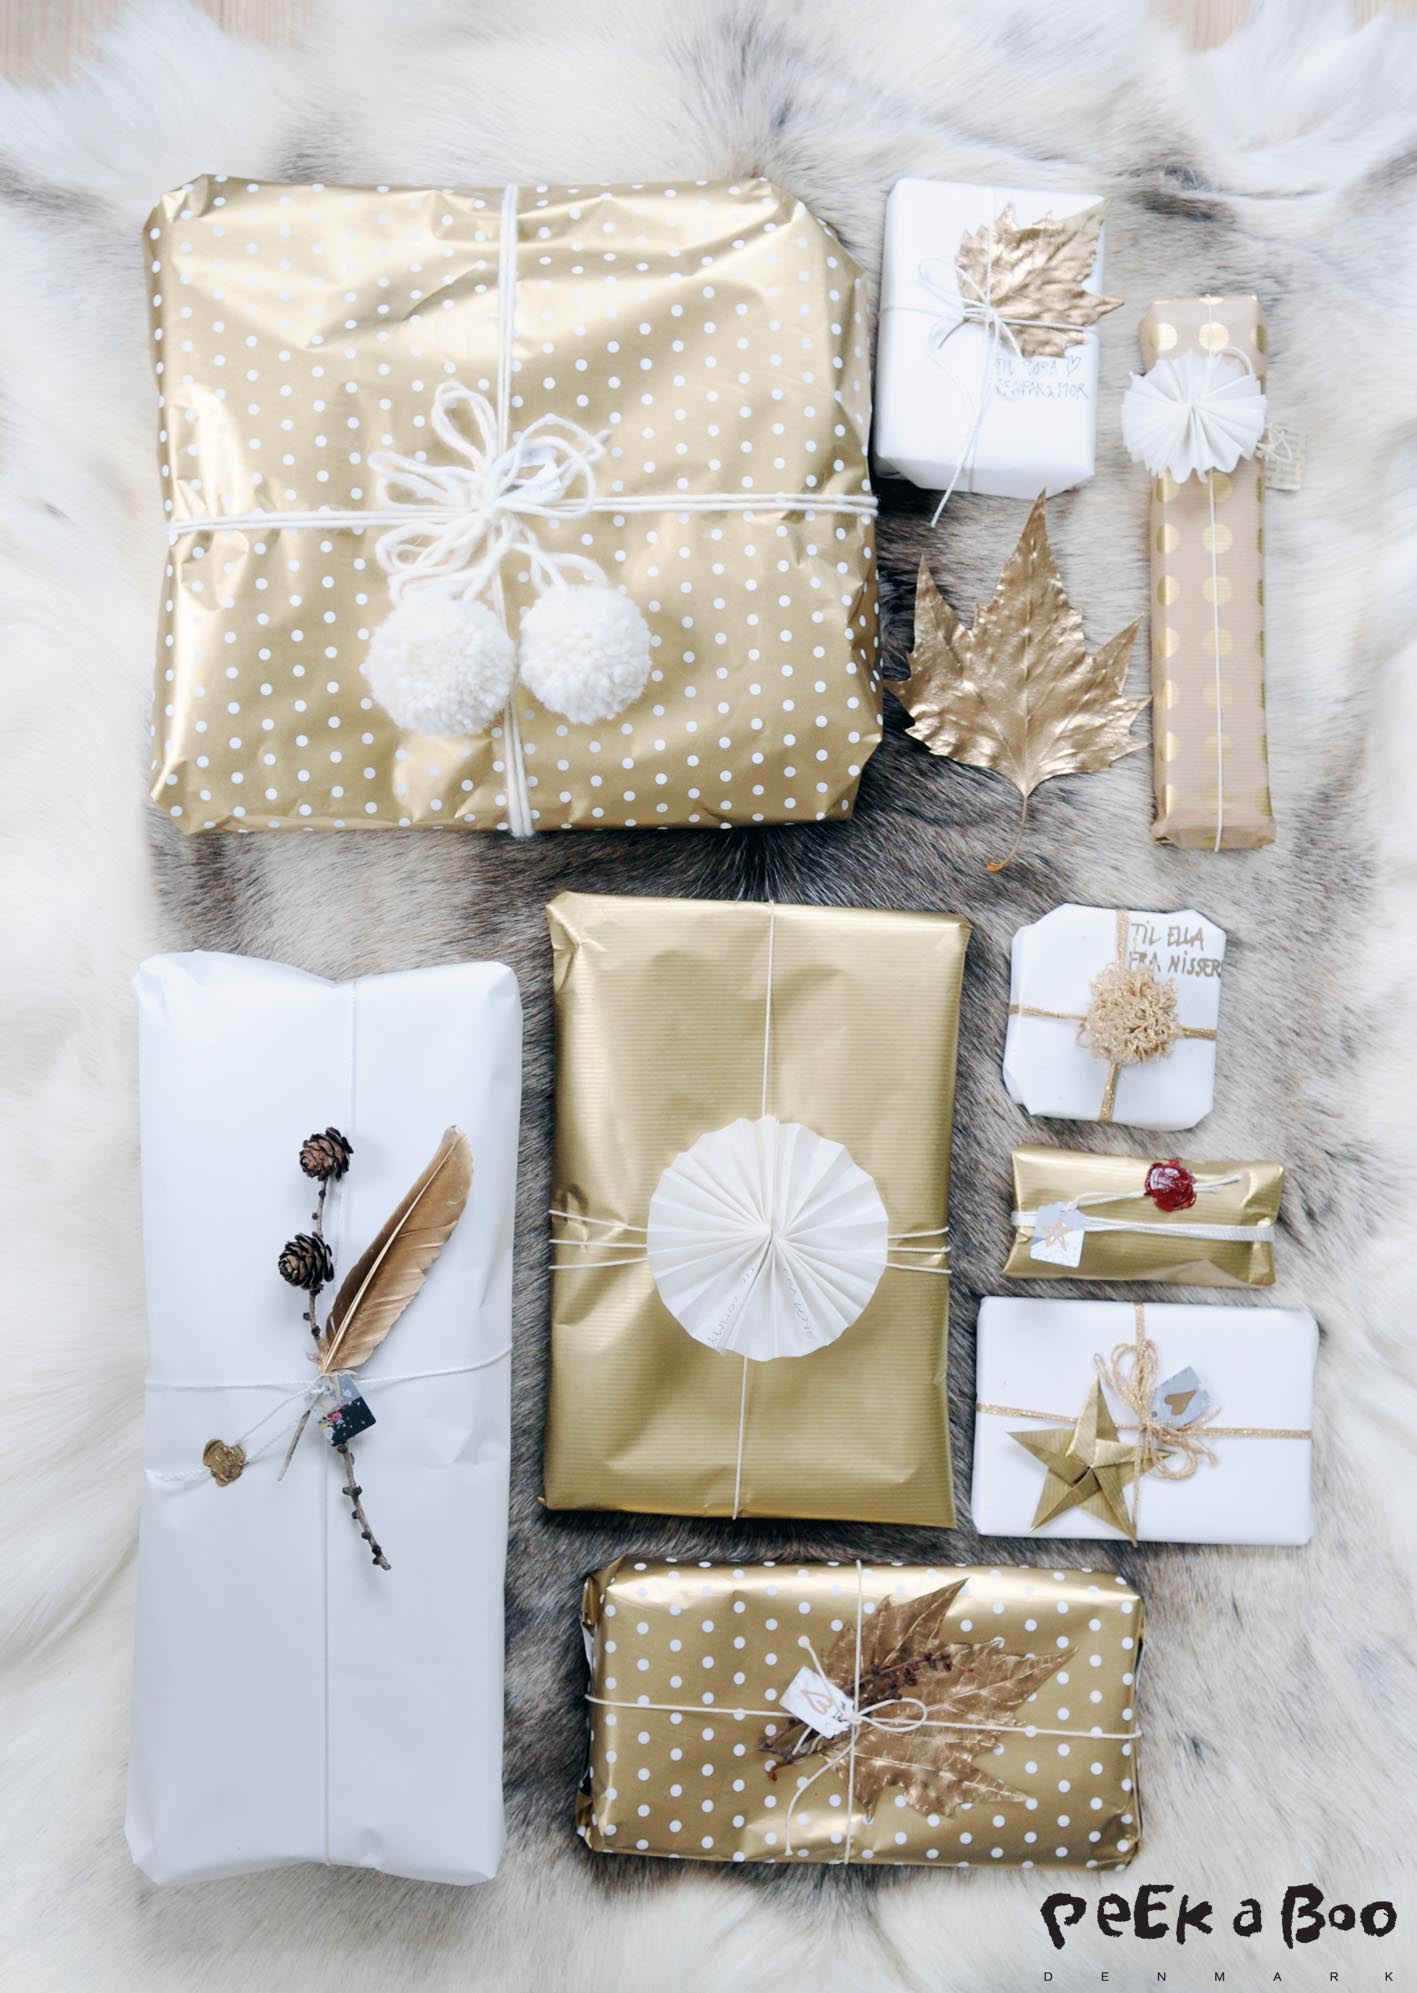 The personal touch that makes the gift extra special.